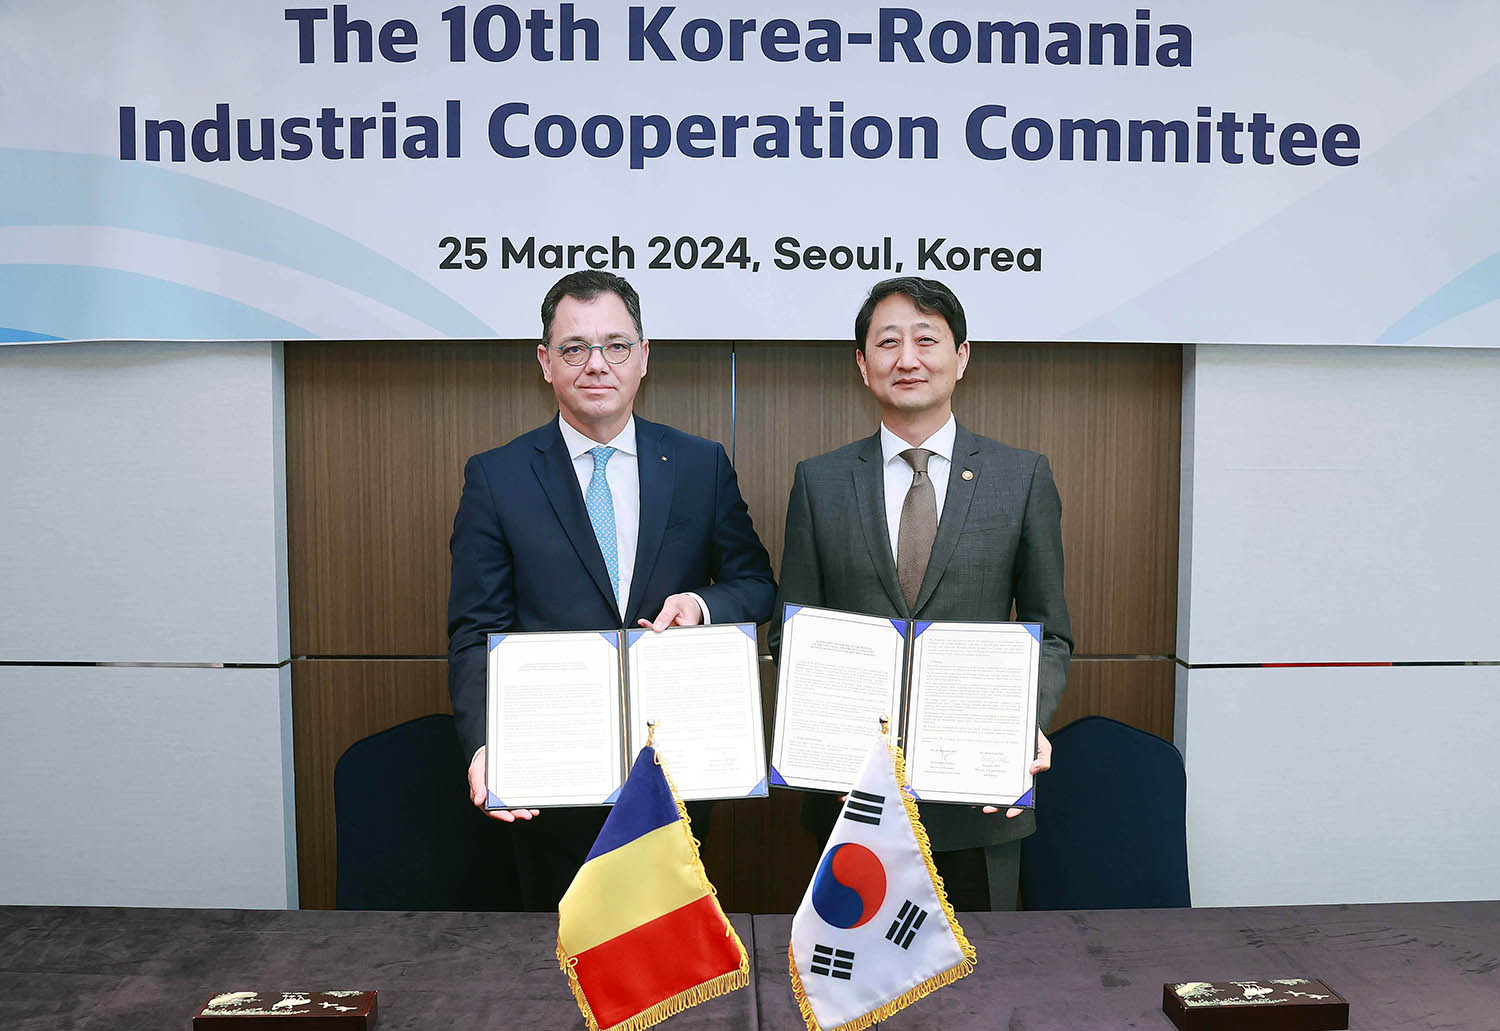 Signing the Agreed Minutes to 10th Korea-Romania Industrial Cooperation Committee Meeting